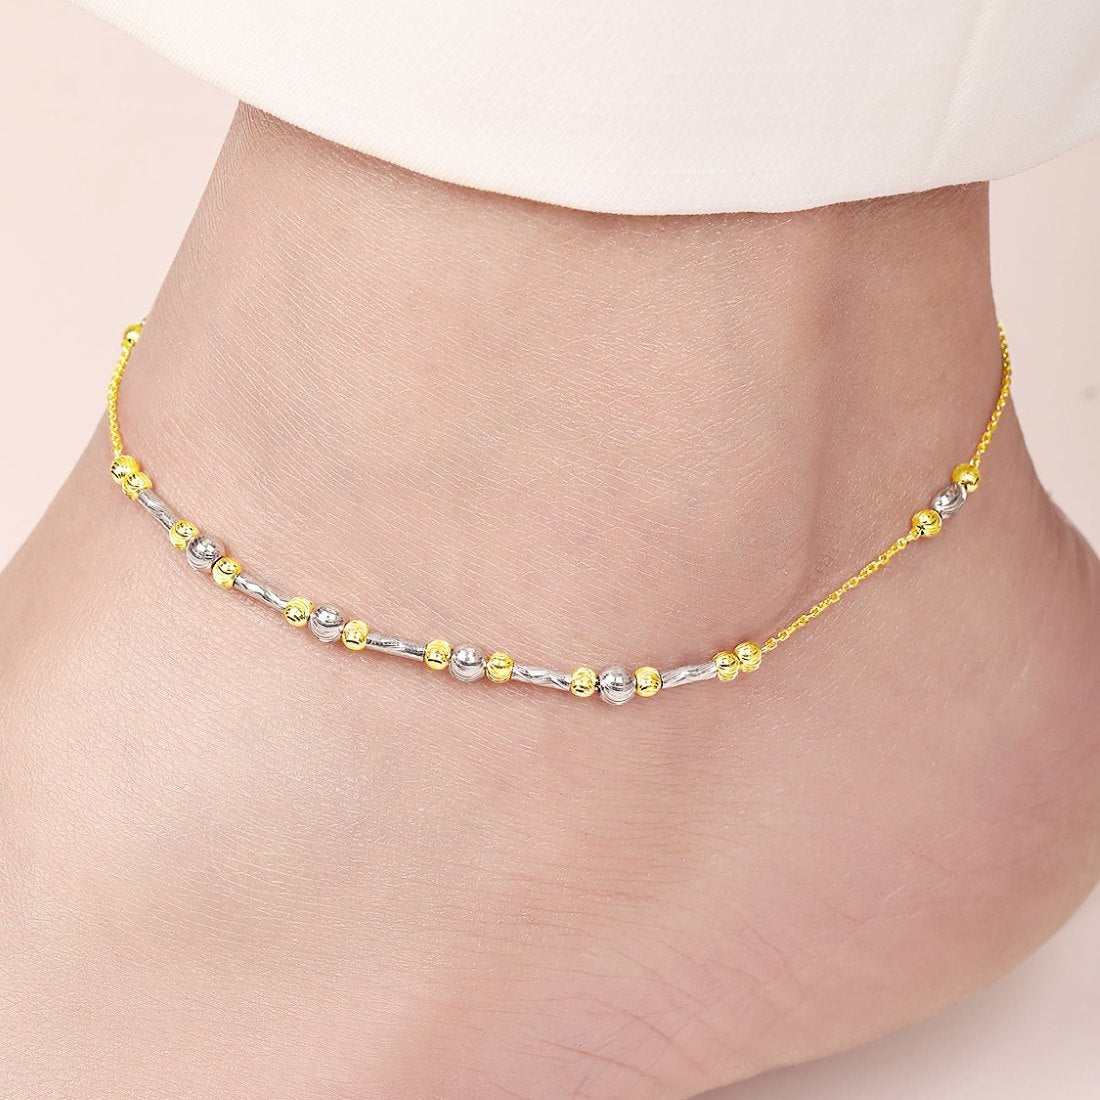 Duo Radiance 925 Sterling Silver Gold & Rhodium Plated Anklet